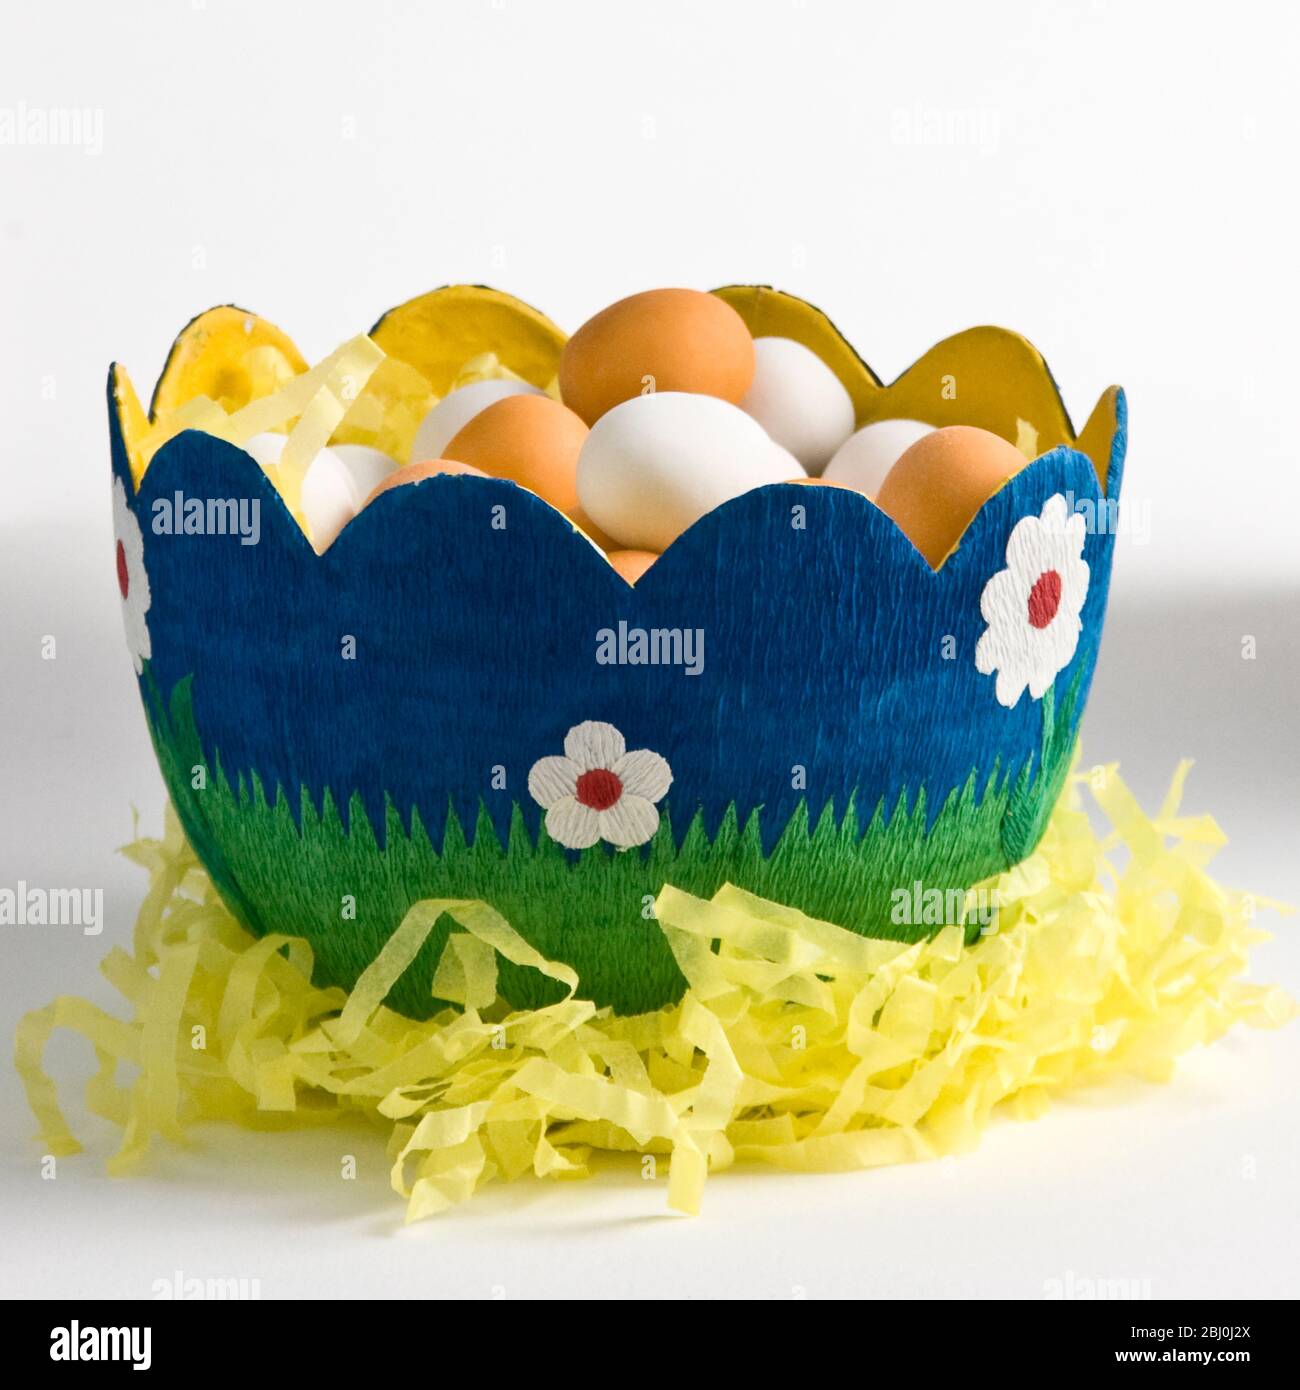 Egg shaped decorated paper bowl with sugar coated chocolate eggs - Stock Photo